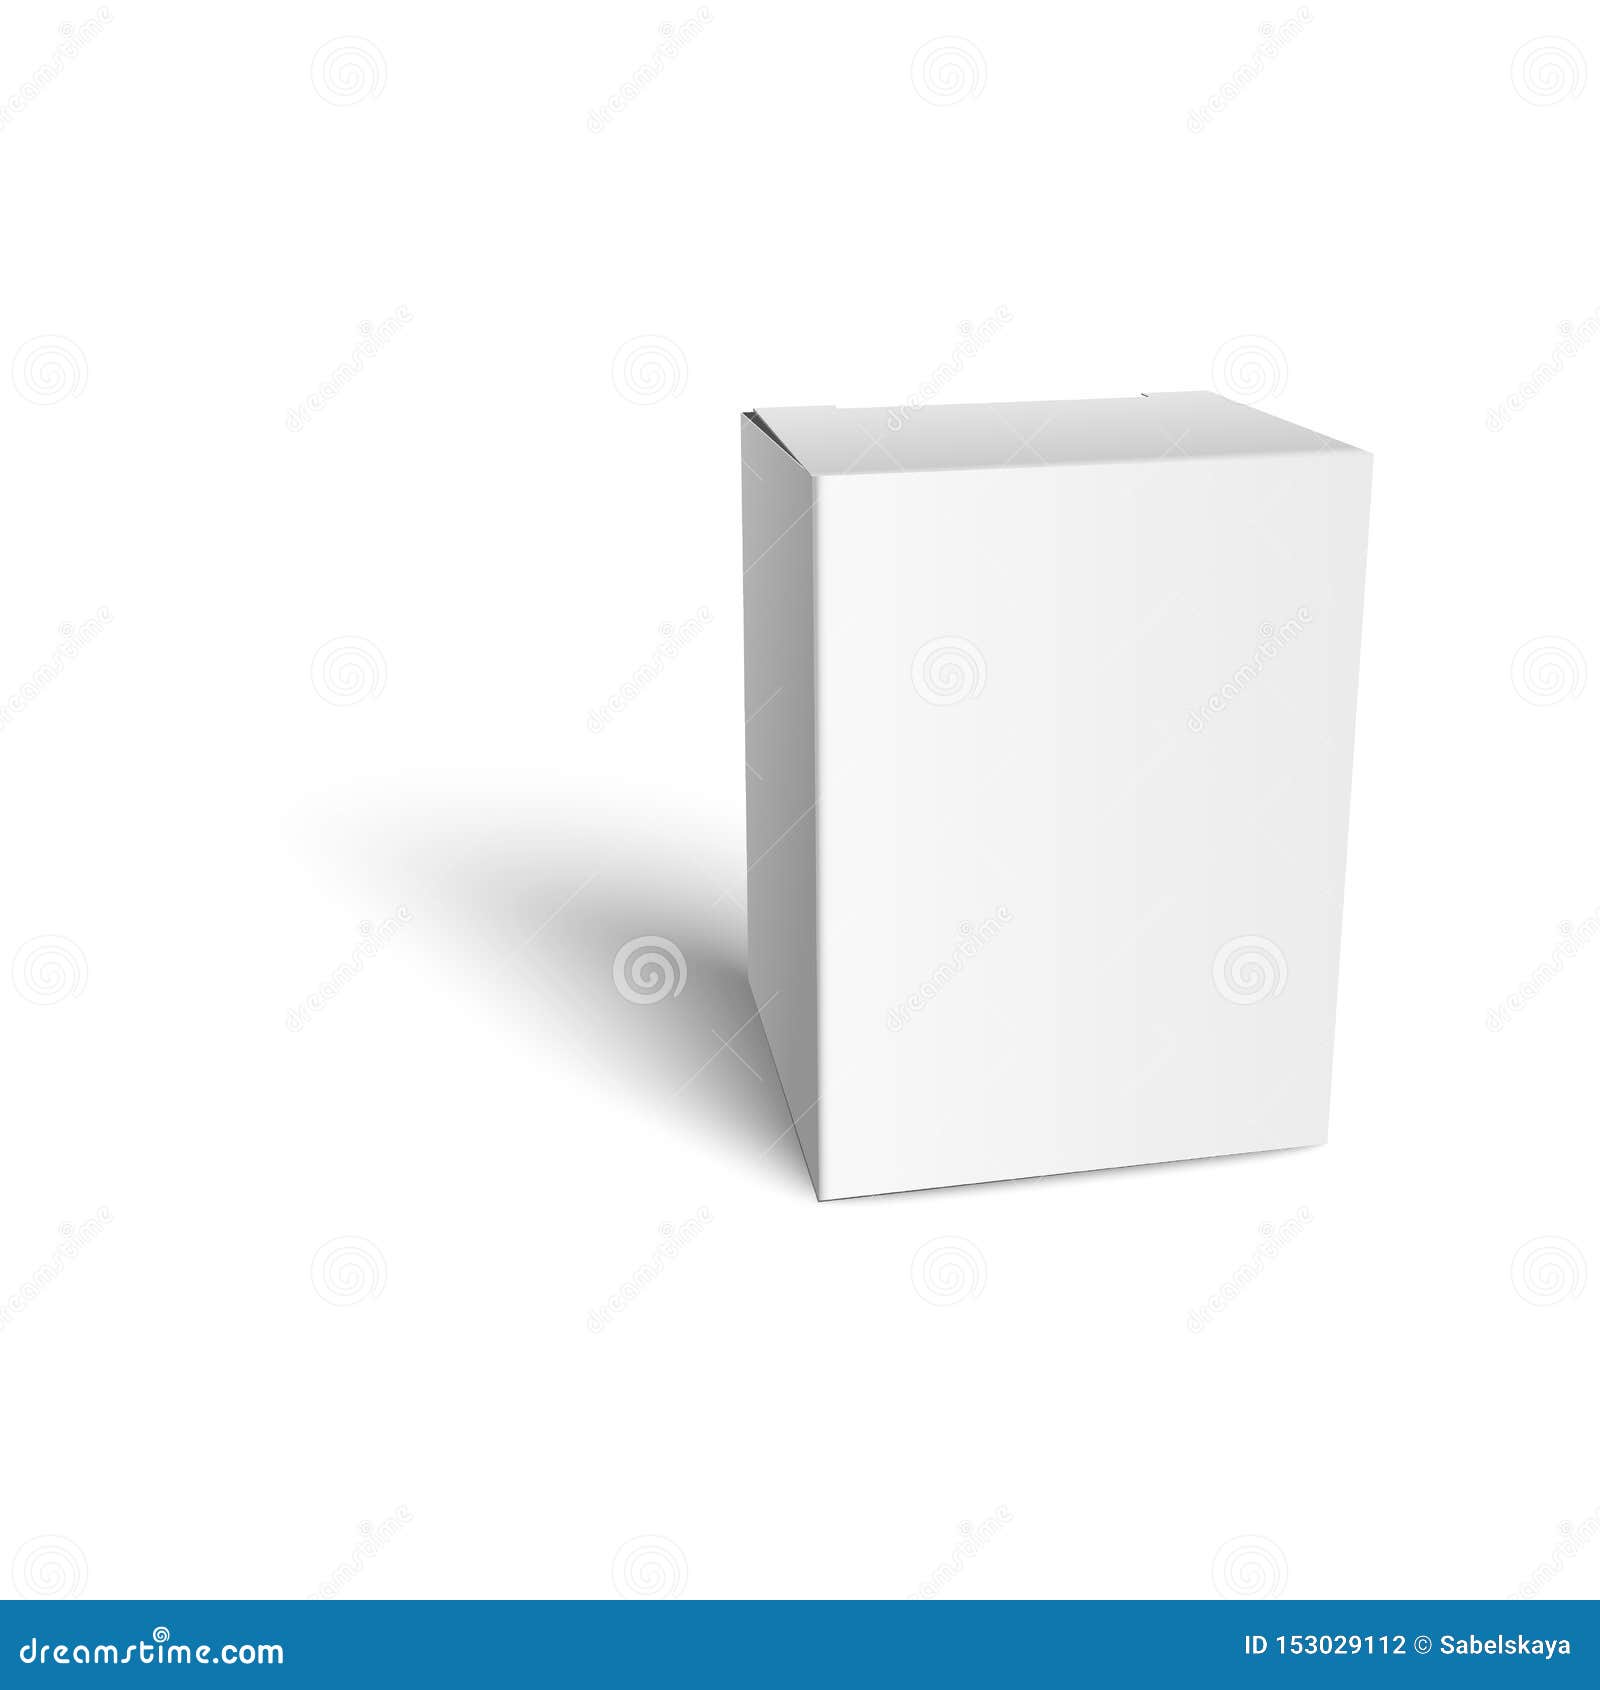 Download White Cardboard Box Mockup With Blank Packaging Empty Realistic Mockup For Retail Package Design Stock Vector Illustration Of Paper Pack 153029112